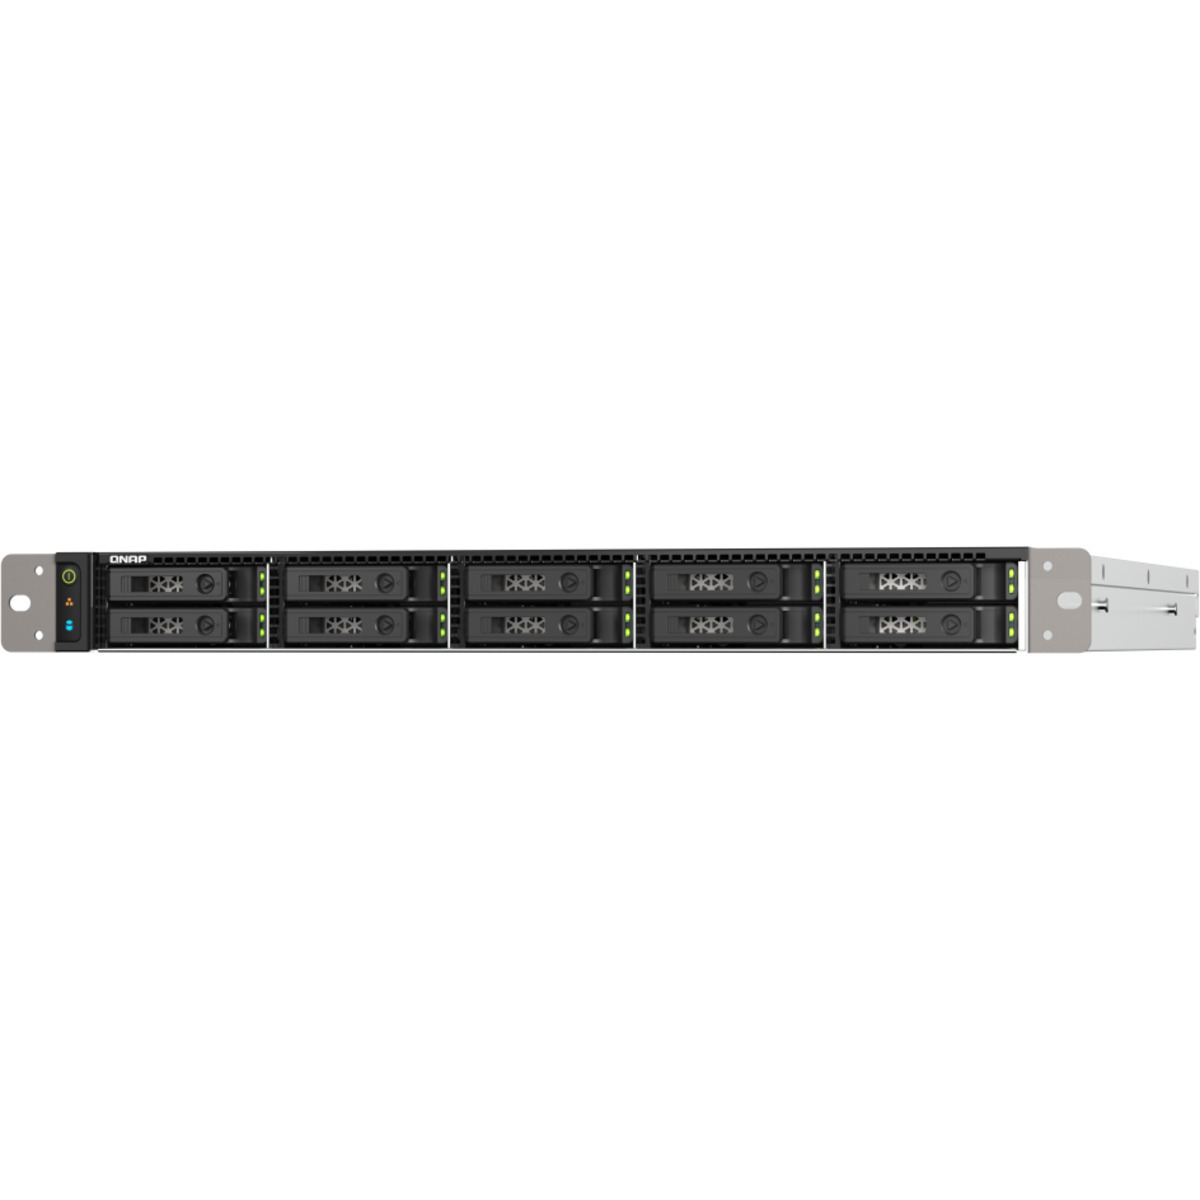 QNAP TS-h1090FU-7302P 28tb 10-Bay RackMount Large Business / Enterprise NAS - Network Attached Storage Device 7x4tb Sabrent Rocket 4 Plus SB-RKT4P-4TB  7000/6850MB/s M.2 2280 NVMe SSD CONSUMER Class Drives Installed - Burn-In Tested TS-h1090FU-7302P